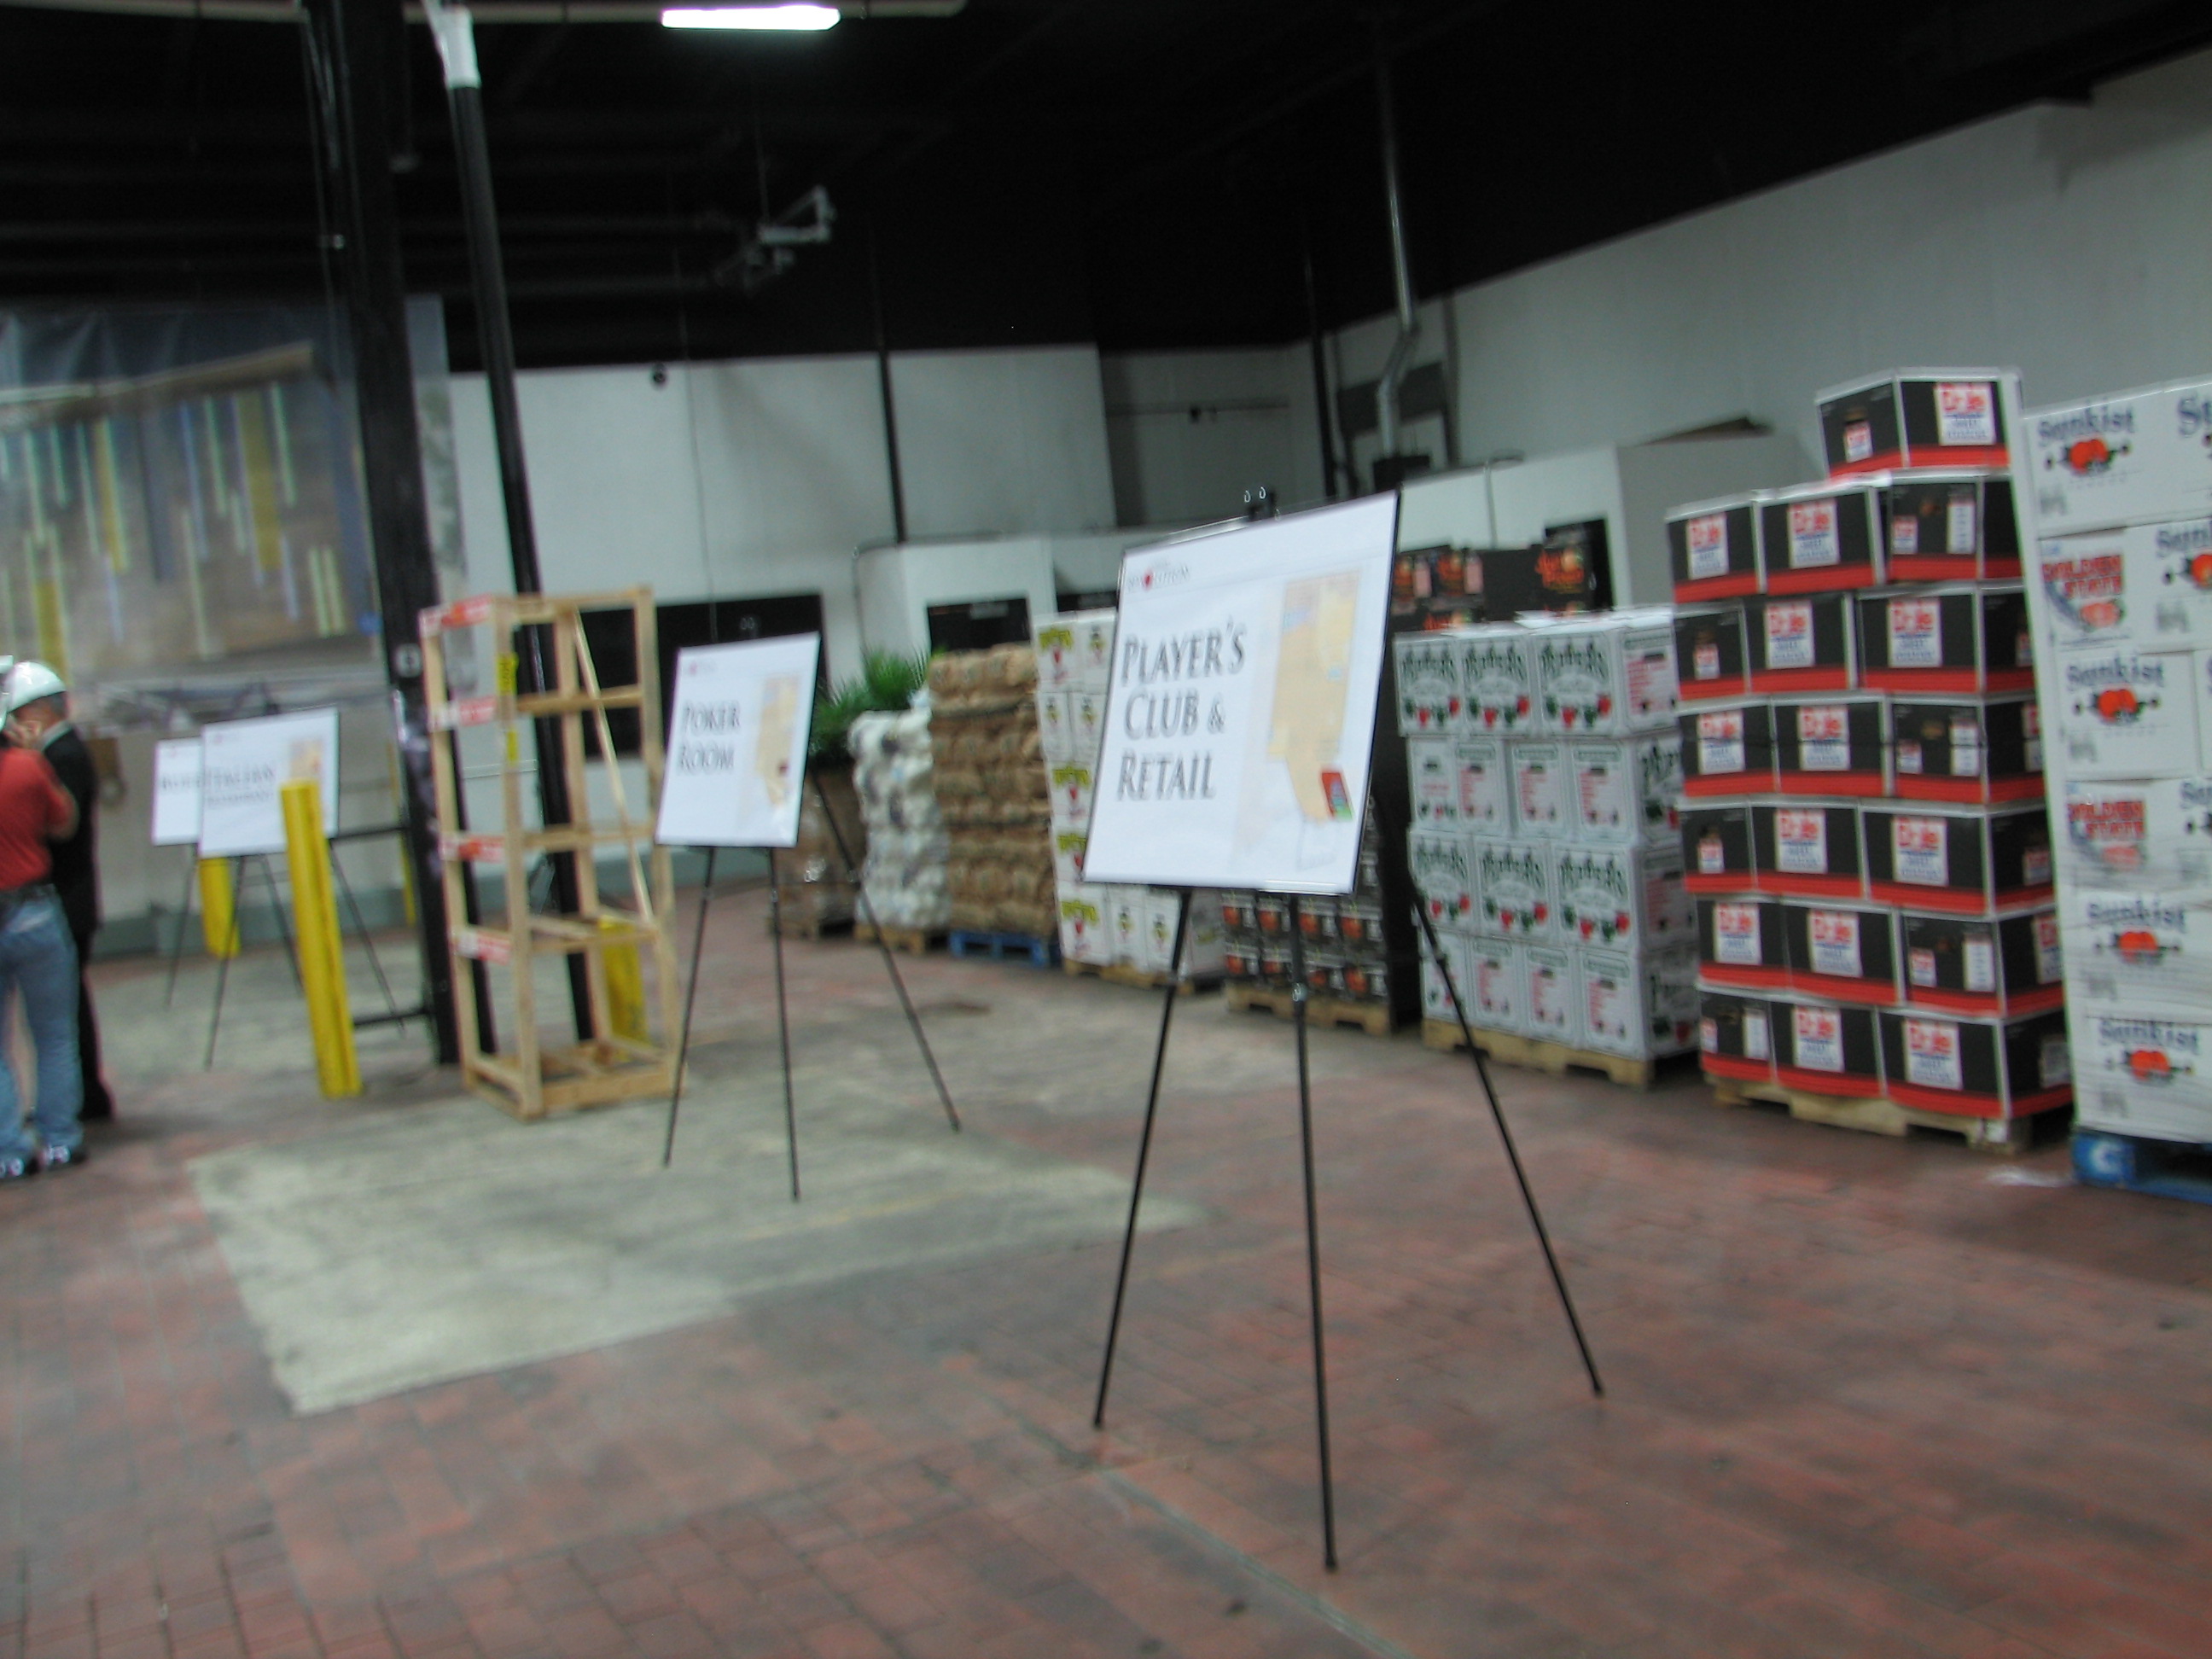 Boxes of fruit in the warehouse PHL Local Gaming wants to turn into a casino